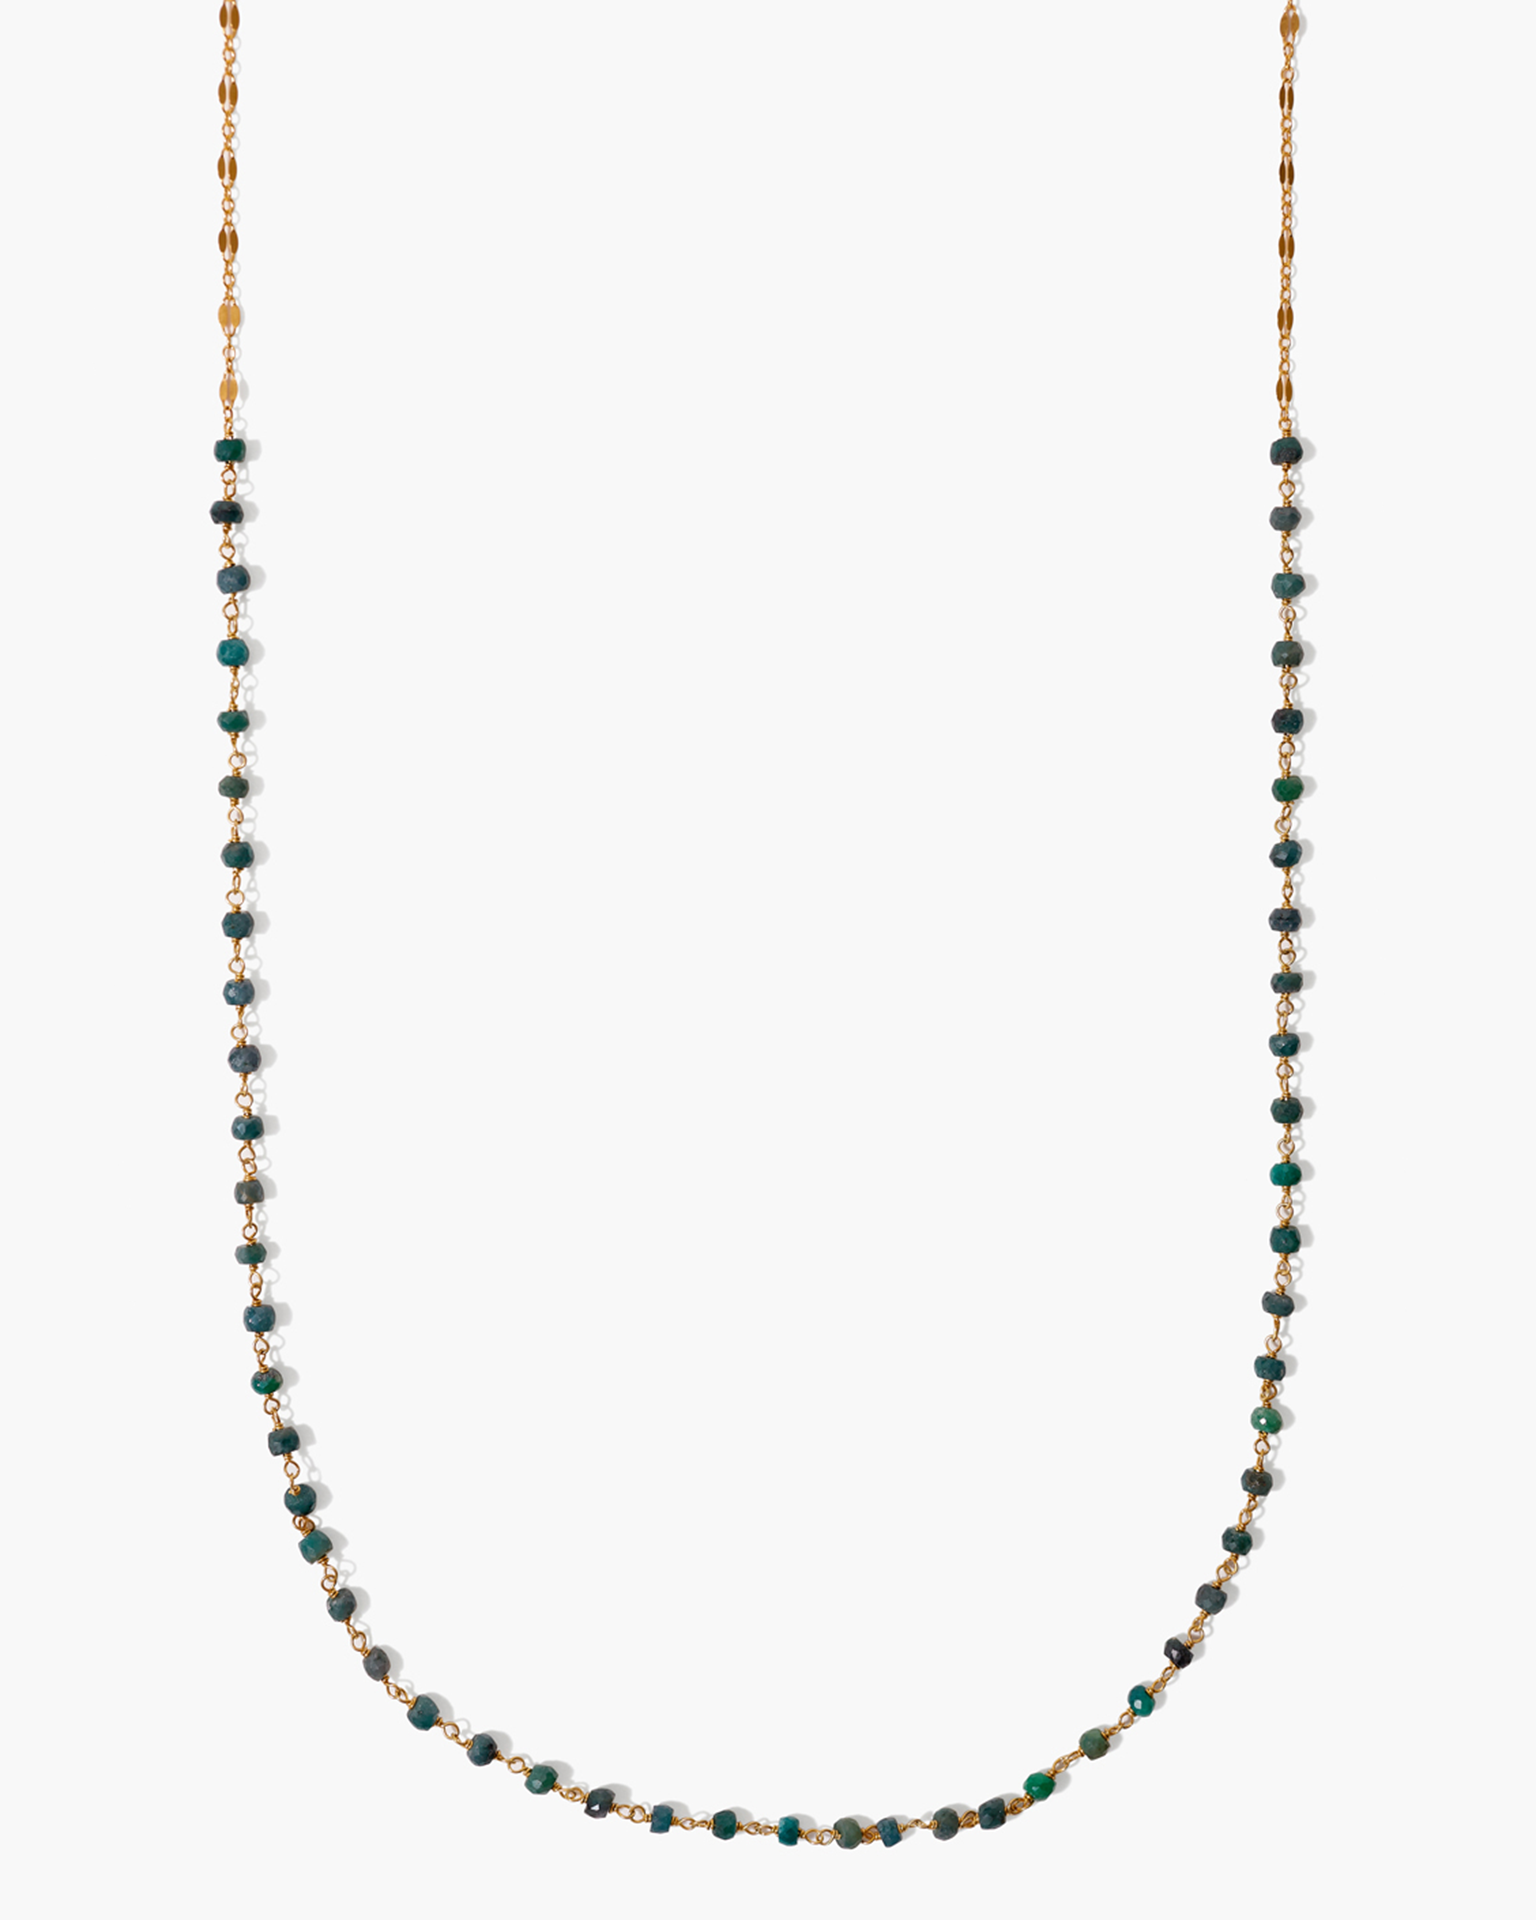 CL NG-14732 Necklace in Emerald